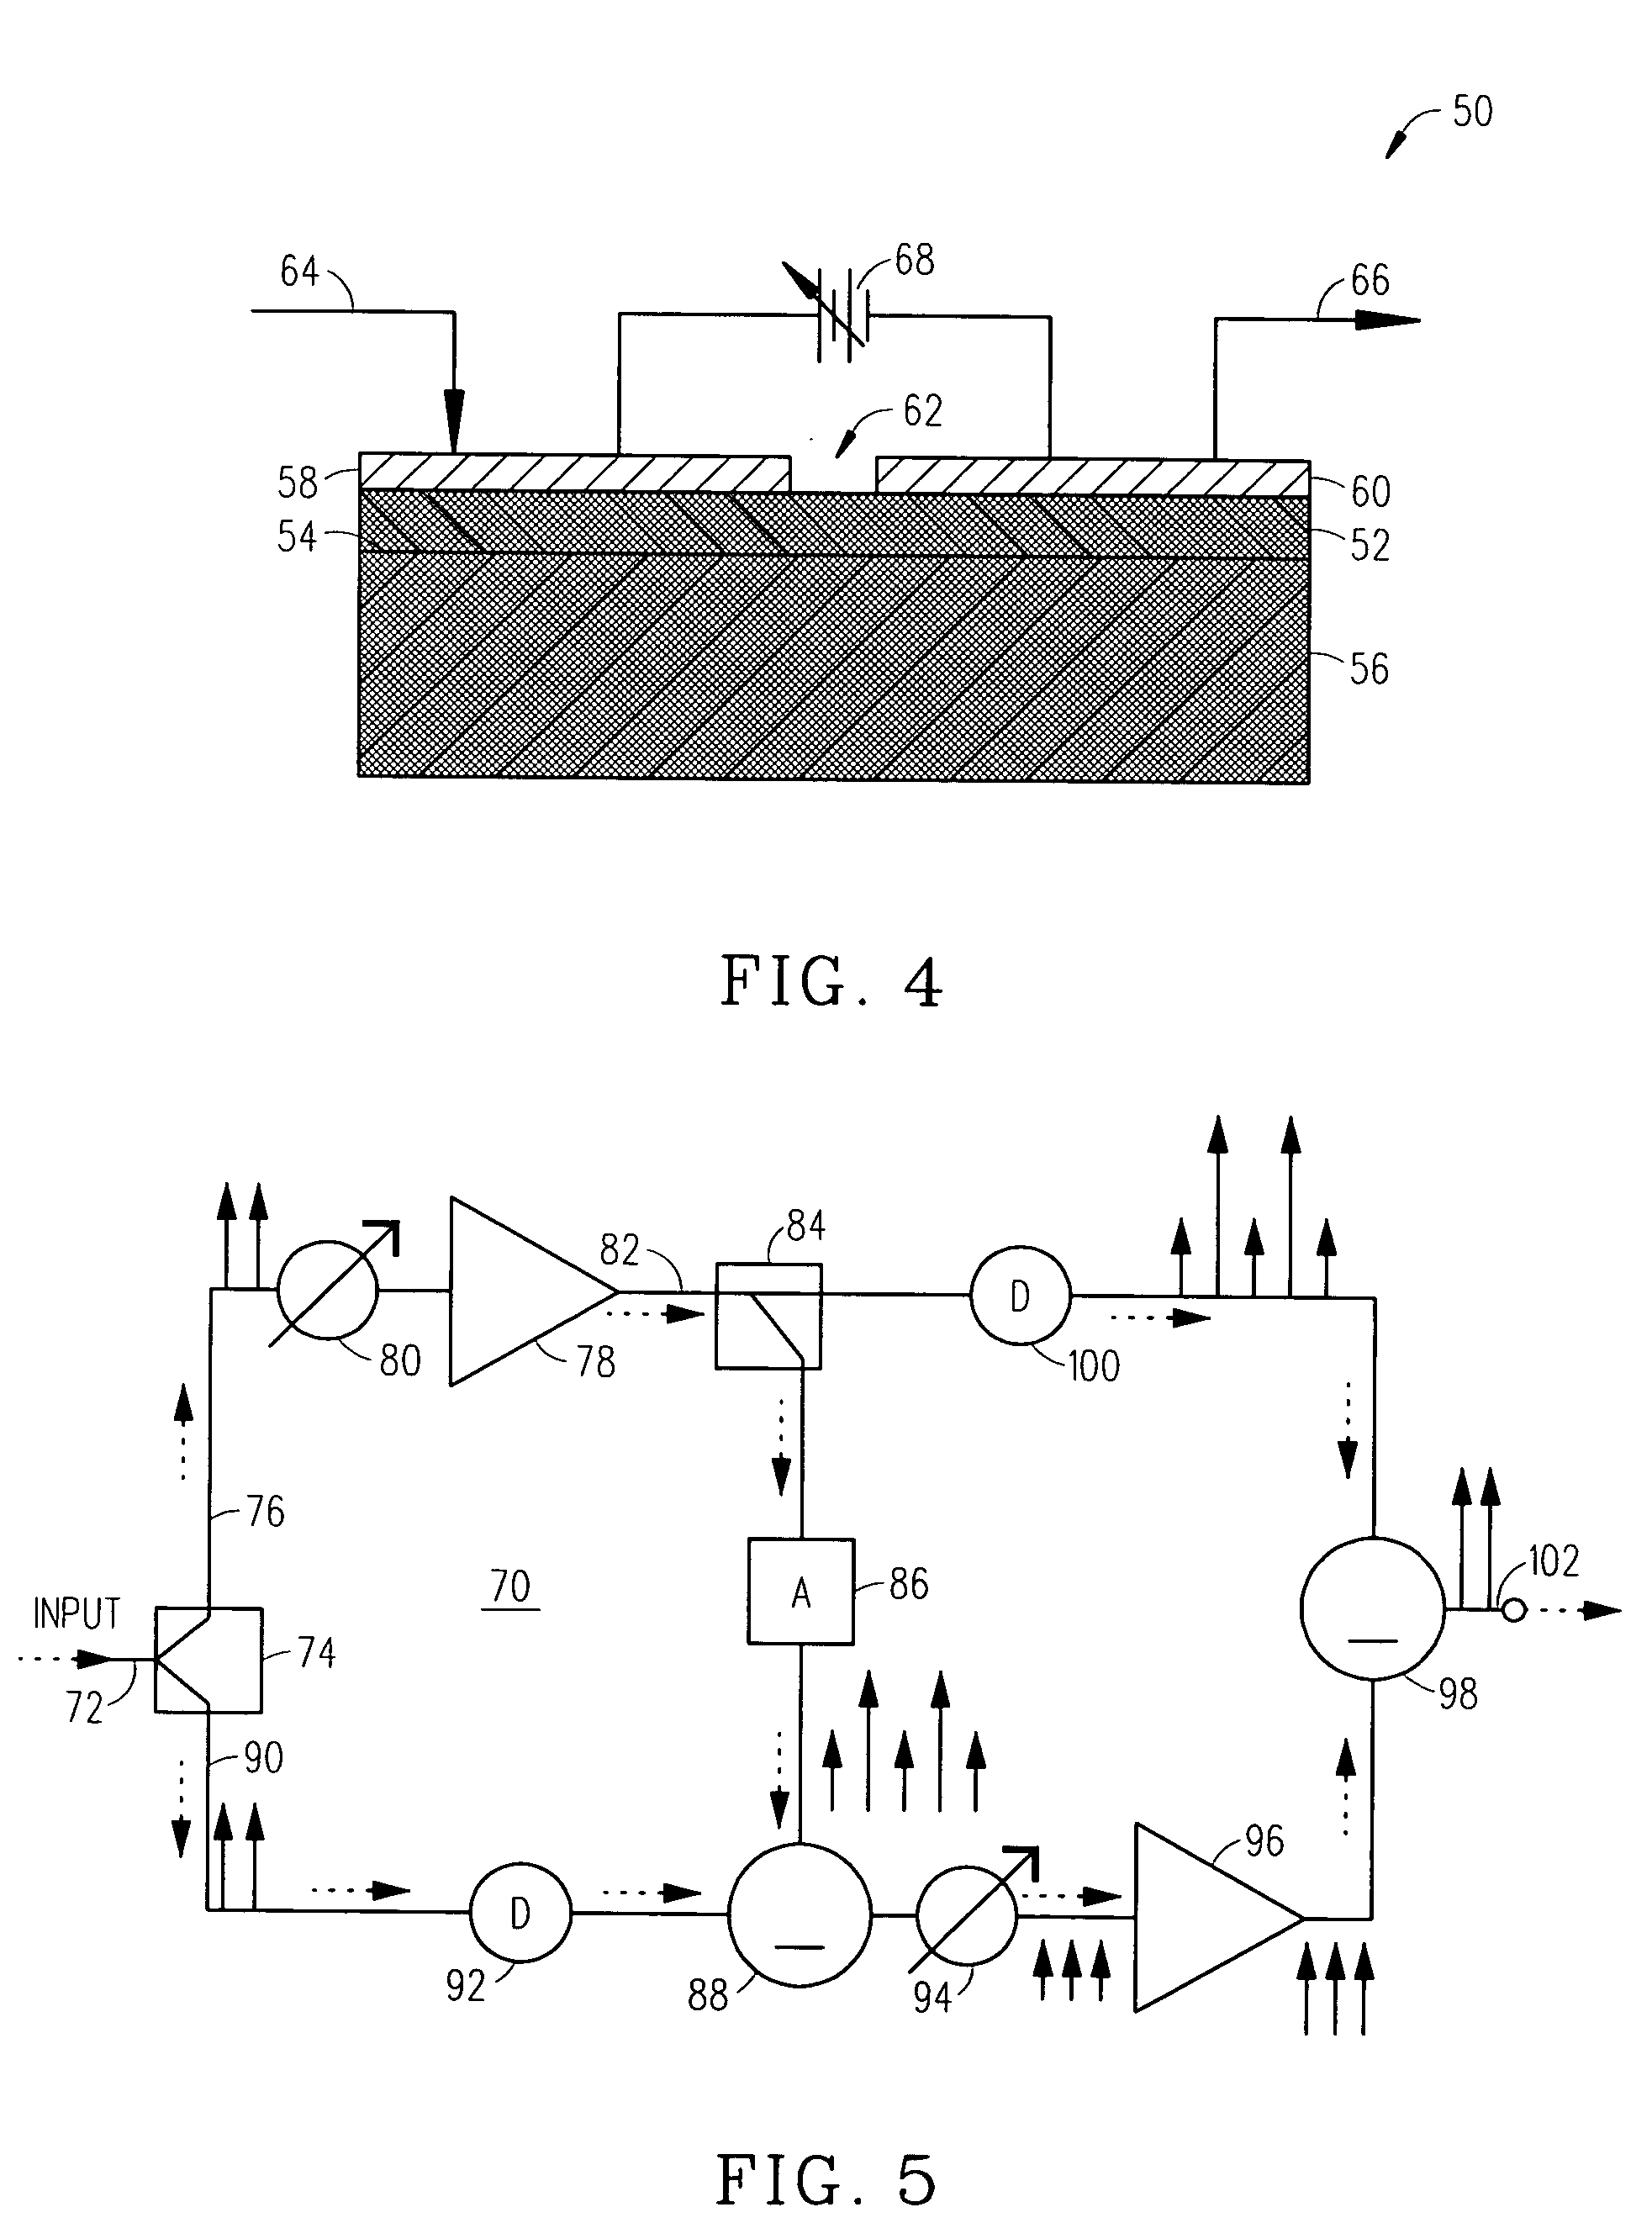 Feed forward amplifier with multiple cancellation loops capable of reducing intermodulation distortion and receive band noise